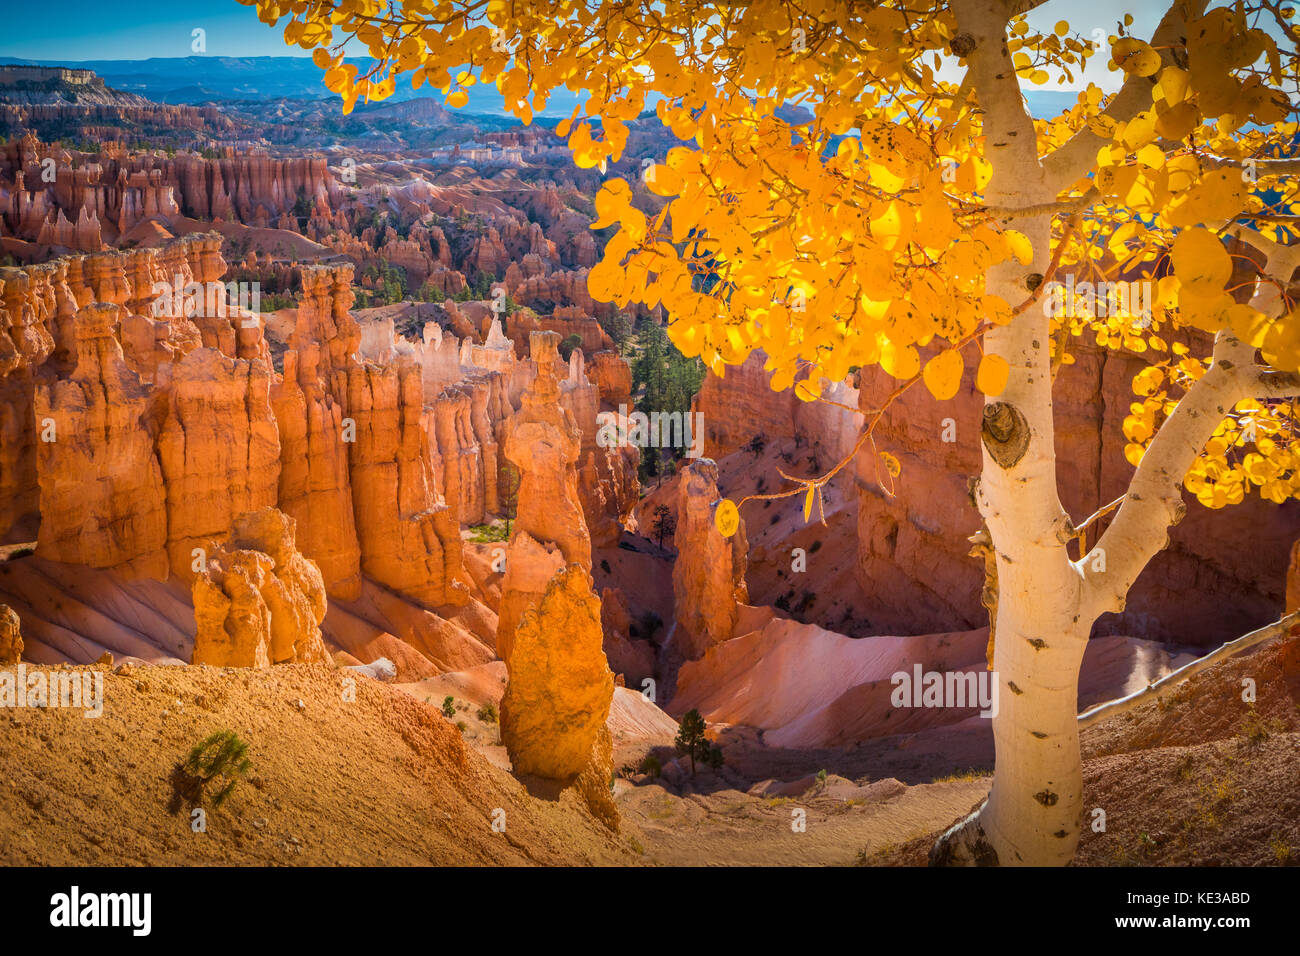 Bryce Canyon National Park, a sprawling reserve in southern Utah, is known for crimson-colored hoodoos, which are spire-shaped rock formations. The pa Stock Photo